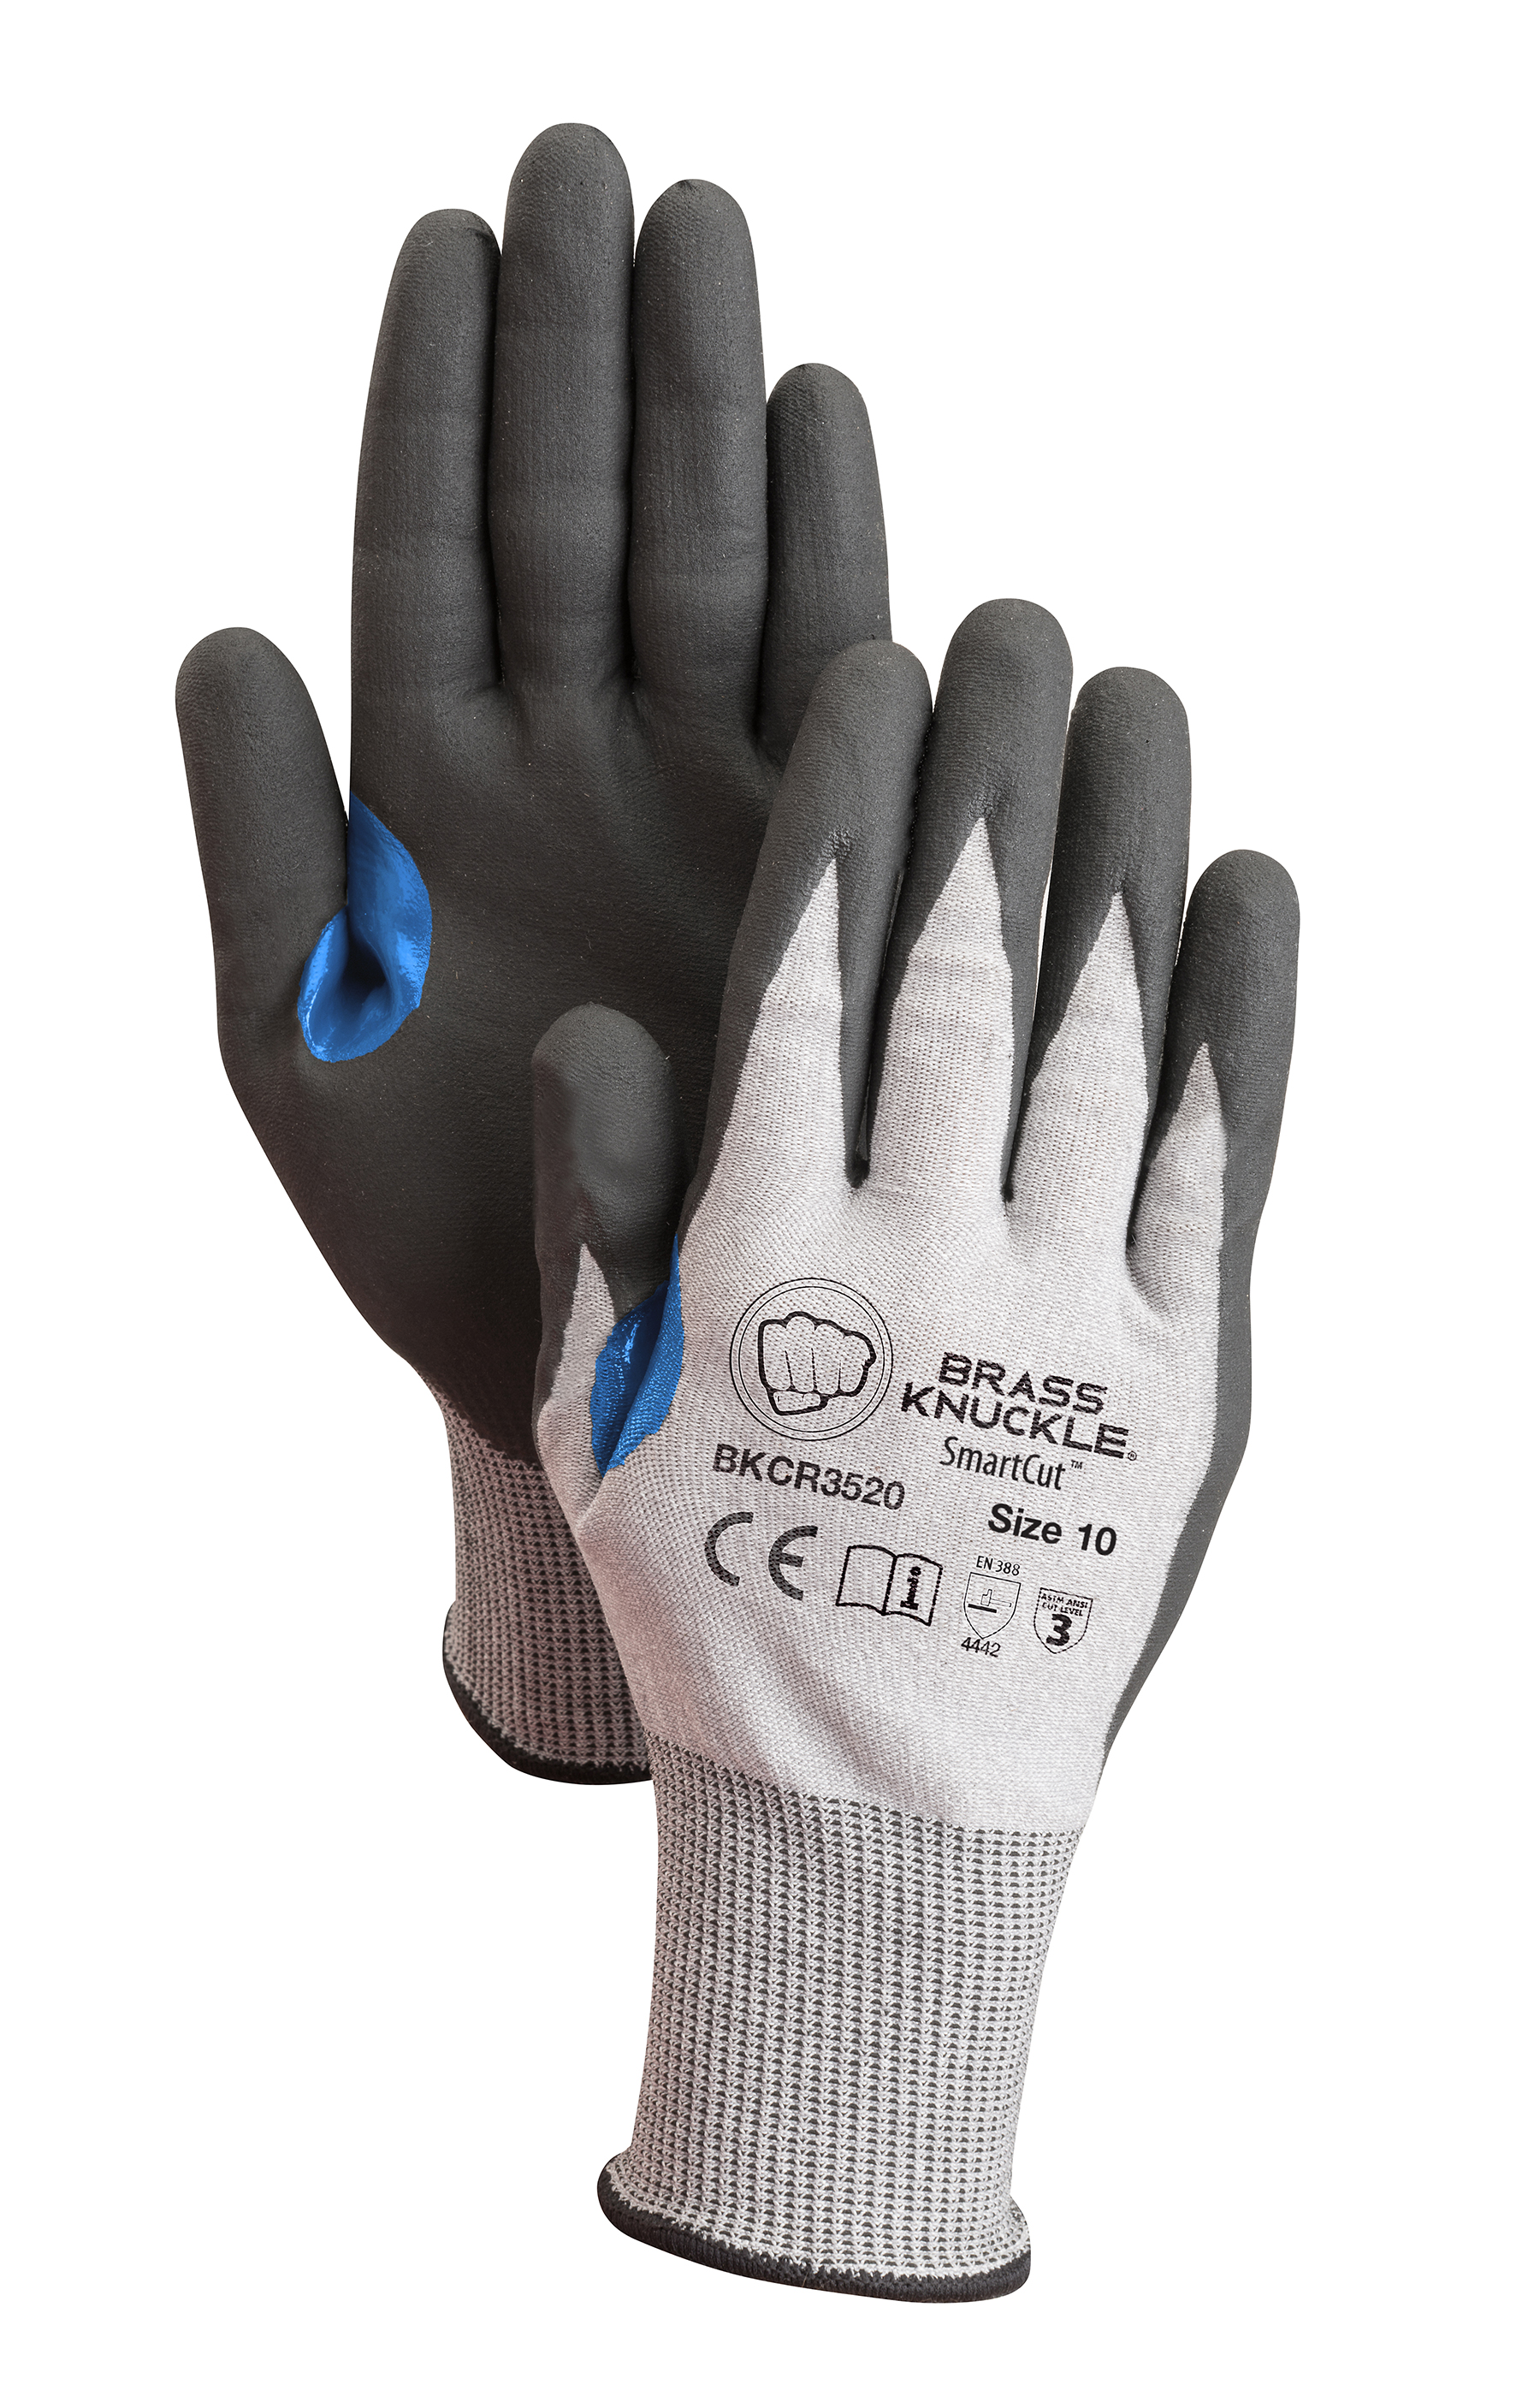 HPPE CR Level A2 Shell Form Nitrile Coating Reinforces Thumb Crotch Glove - Latex, Supported